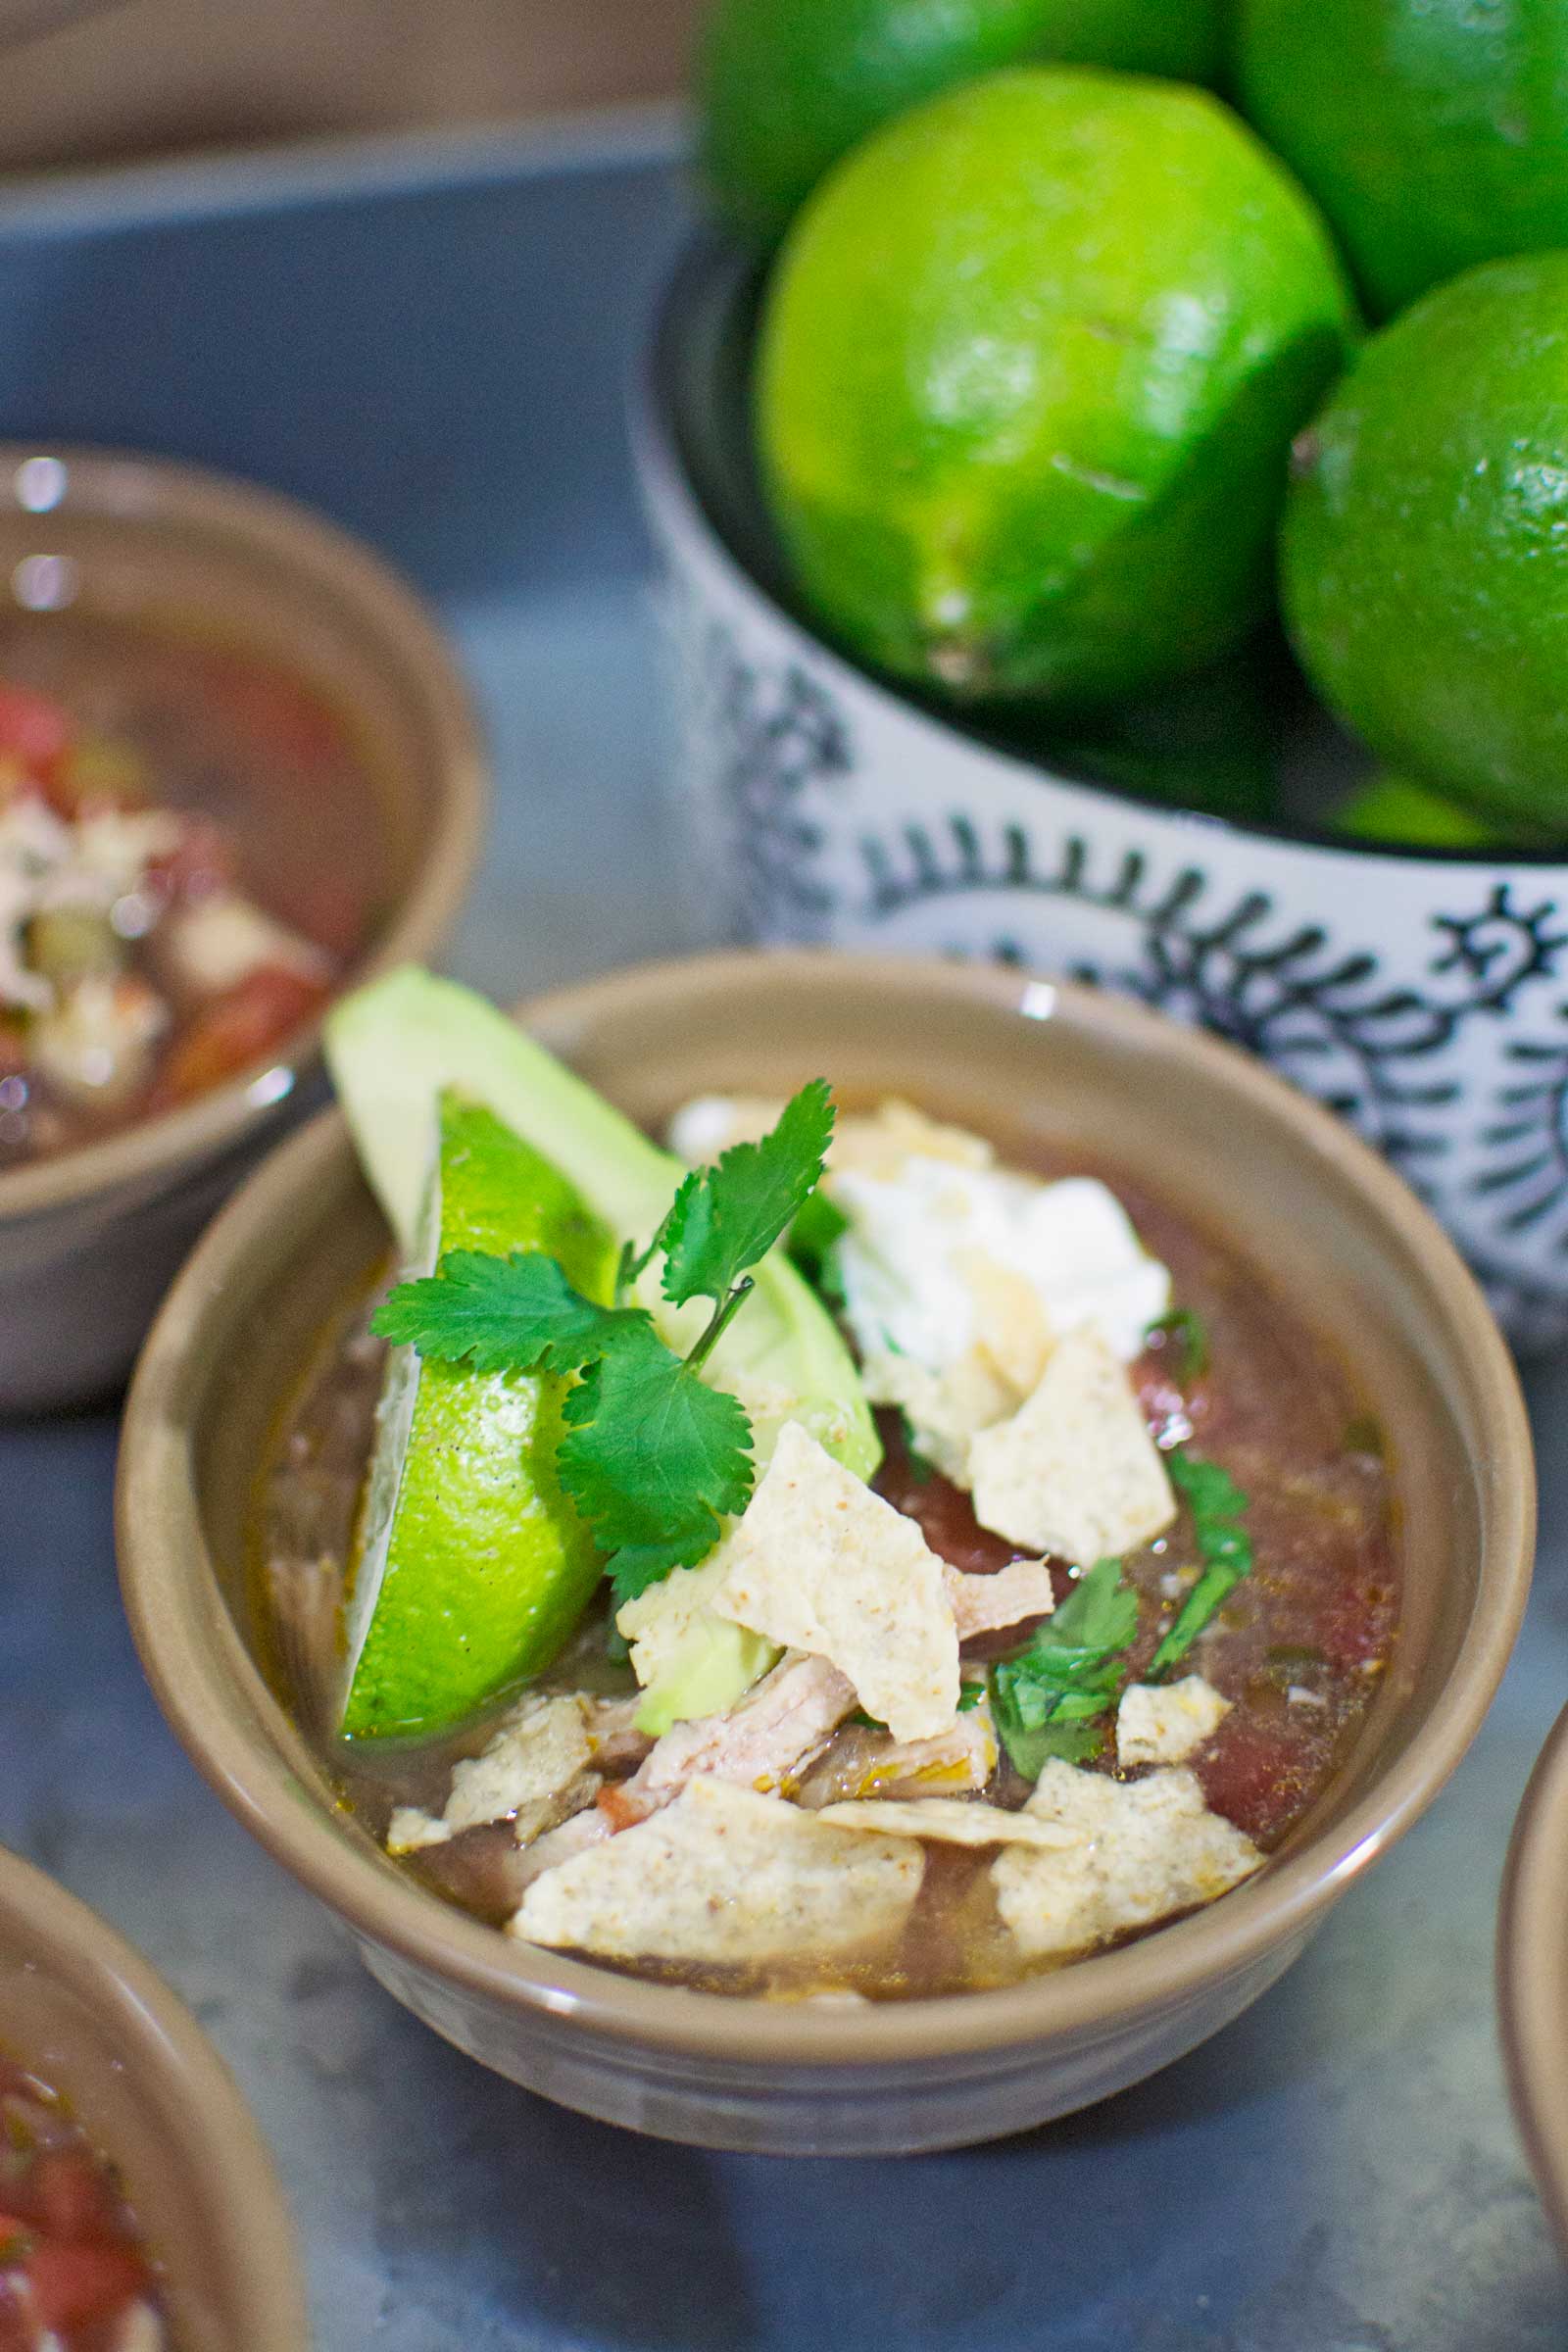 The Big Game # #gamedayglorysweepstakes - Chicken Lime Tortilla Soup